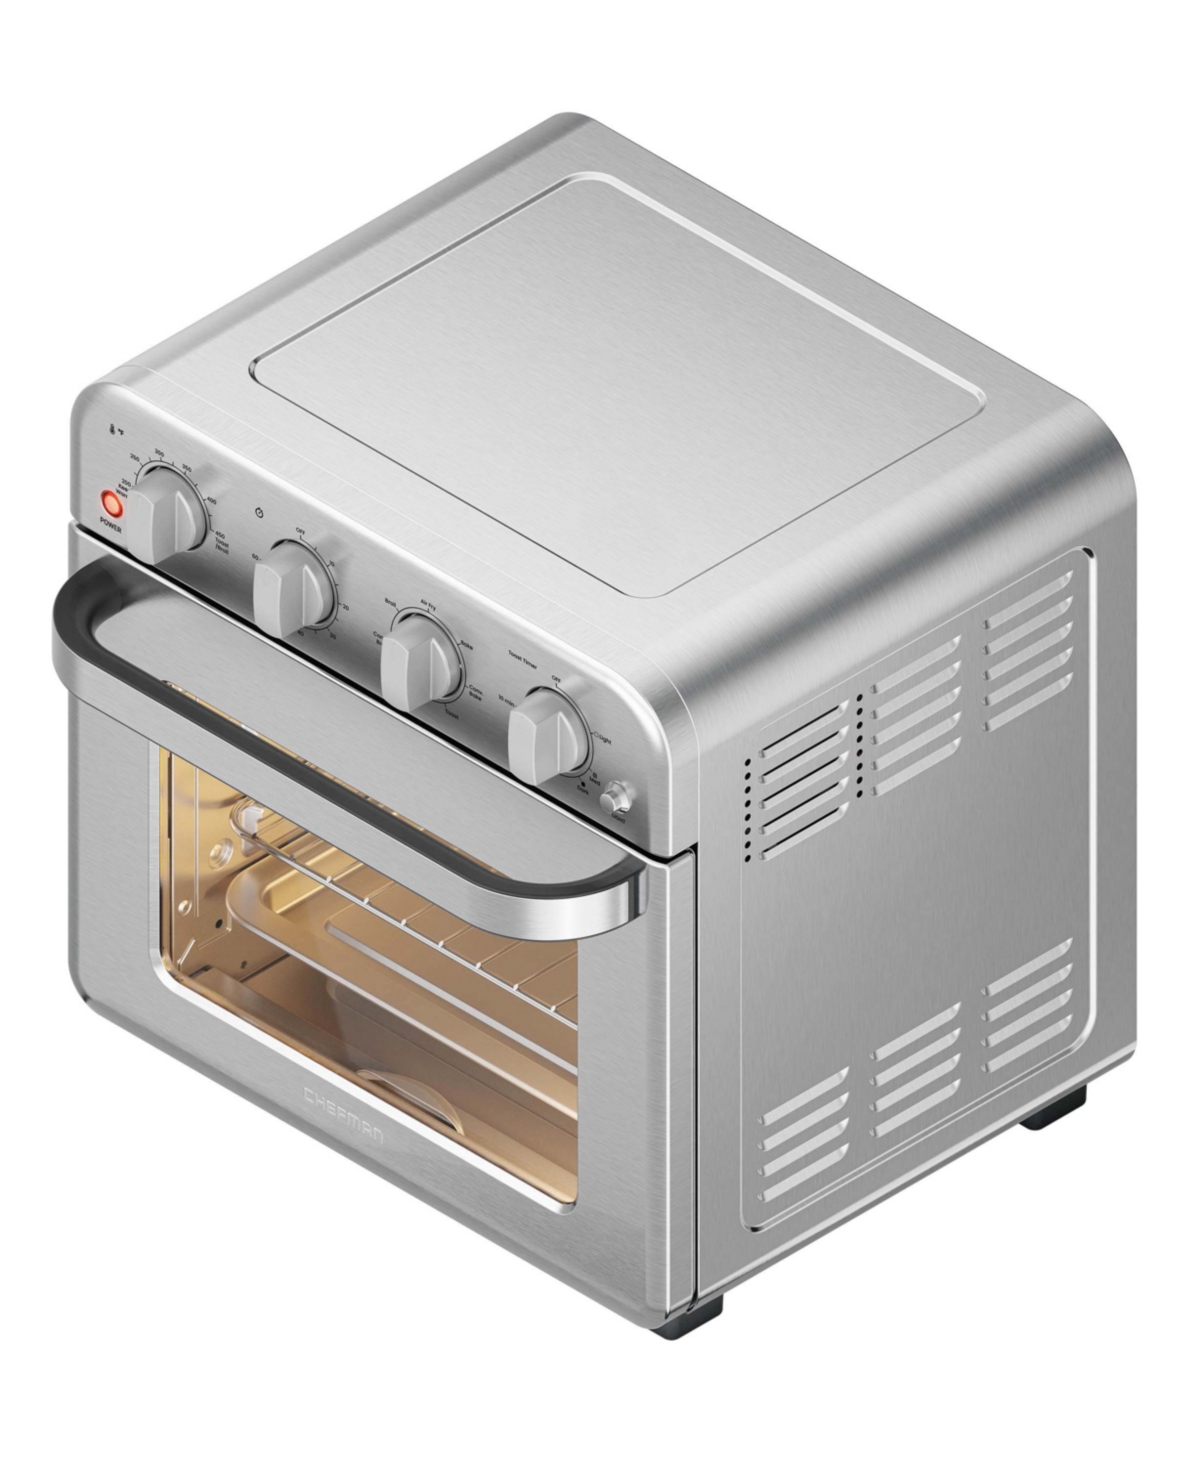 Shop Chefman 19 Quart Toaster Oven Air Fryer In Stainless